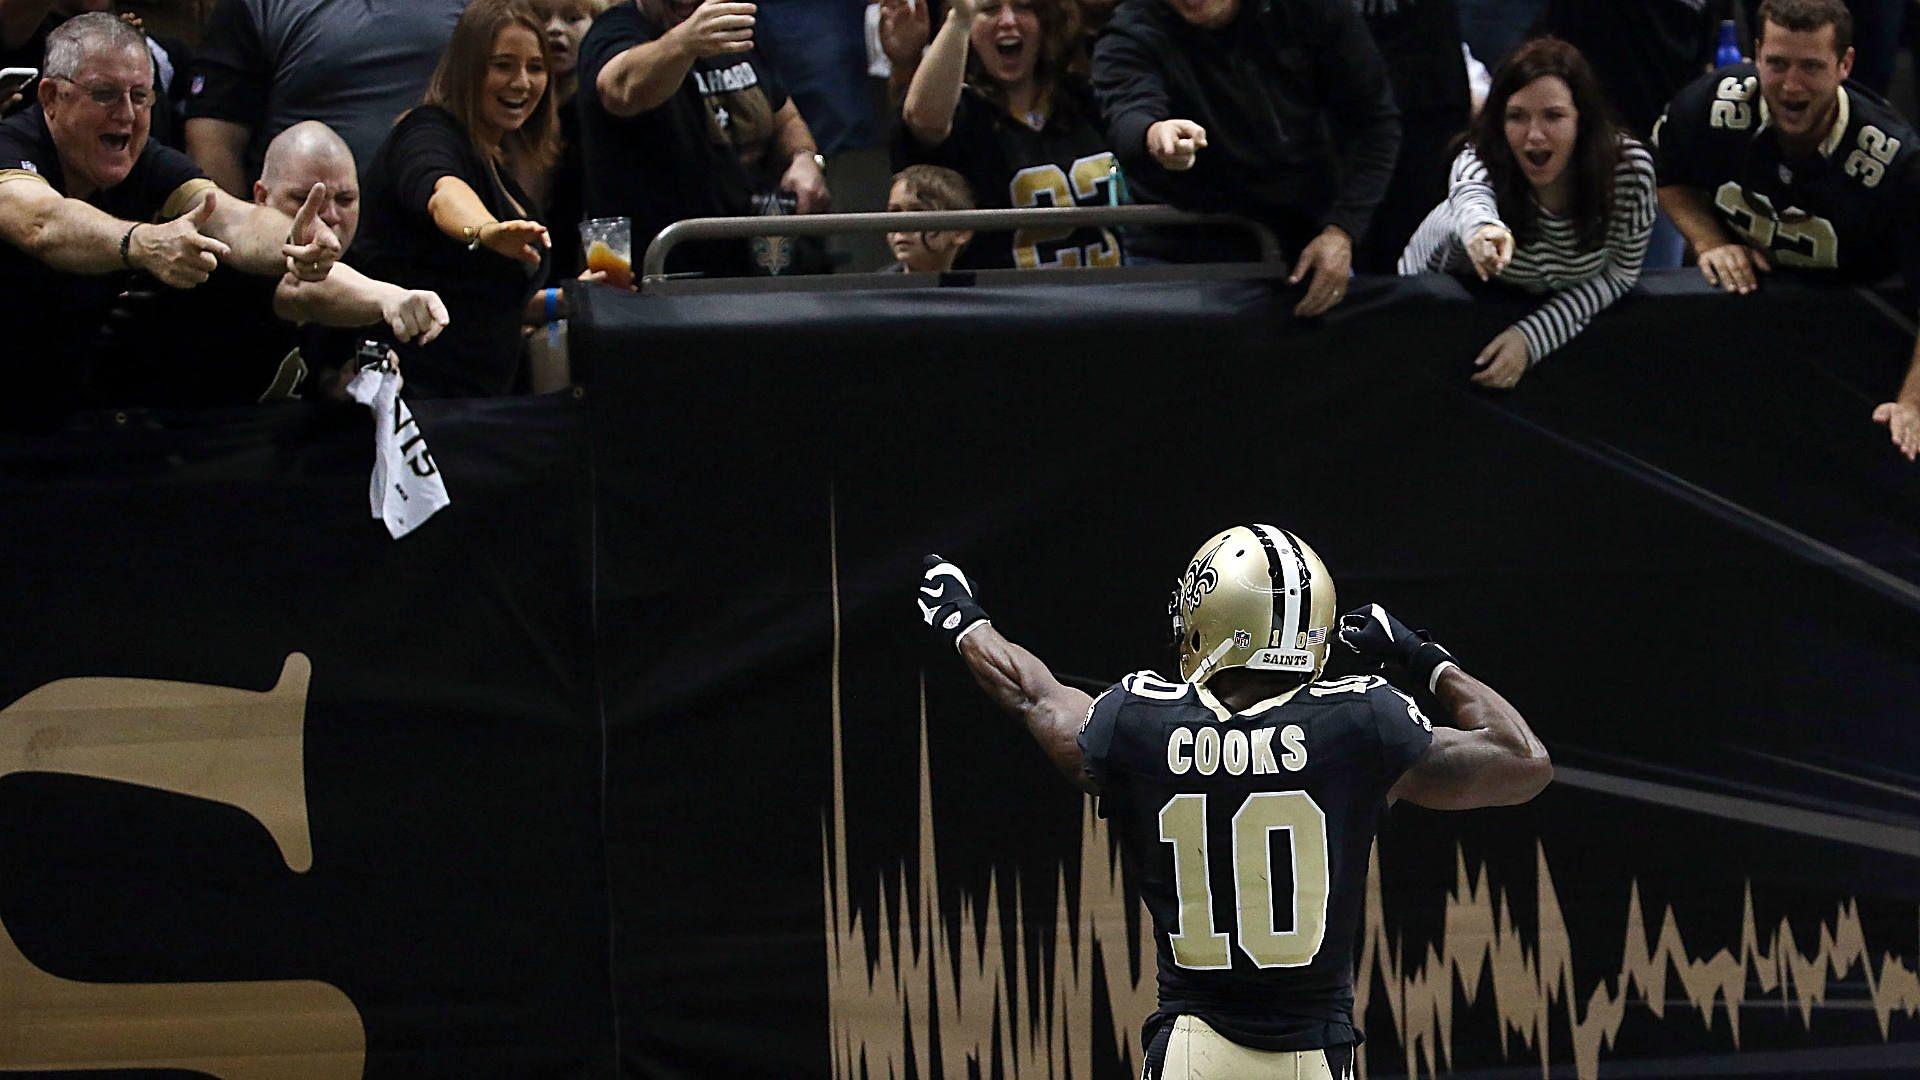 Brandin Cooks plans on continuing bow and arrow celebration